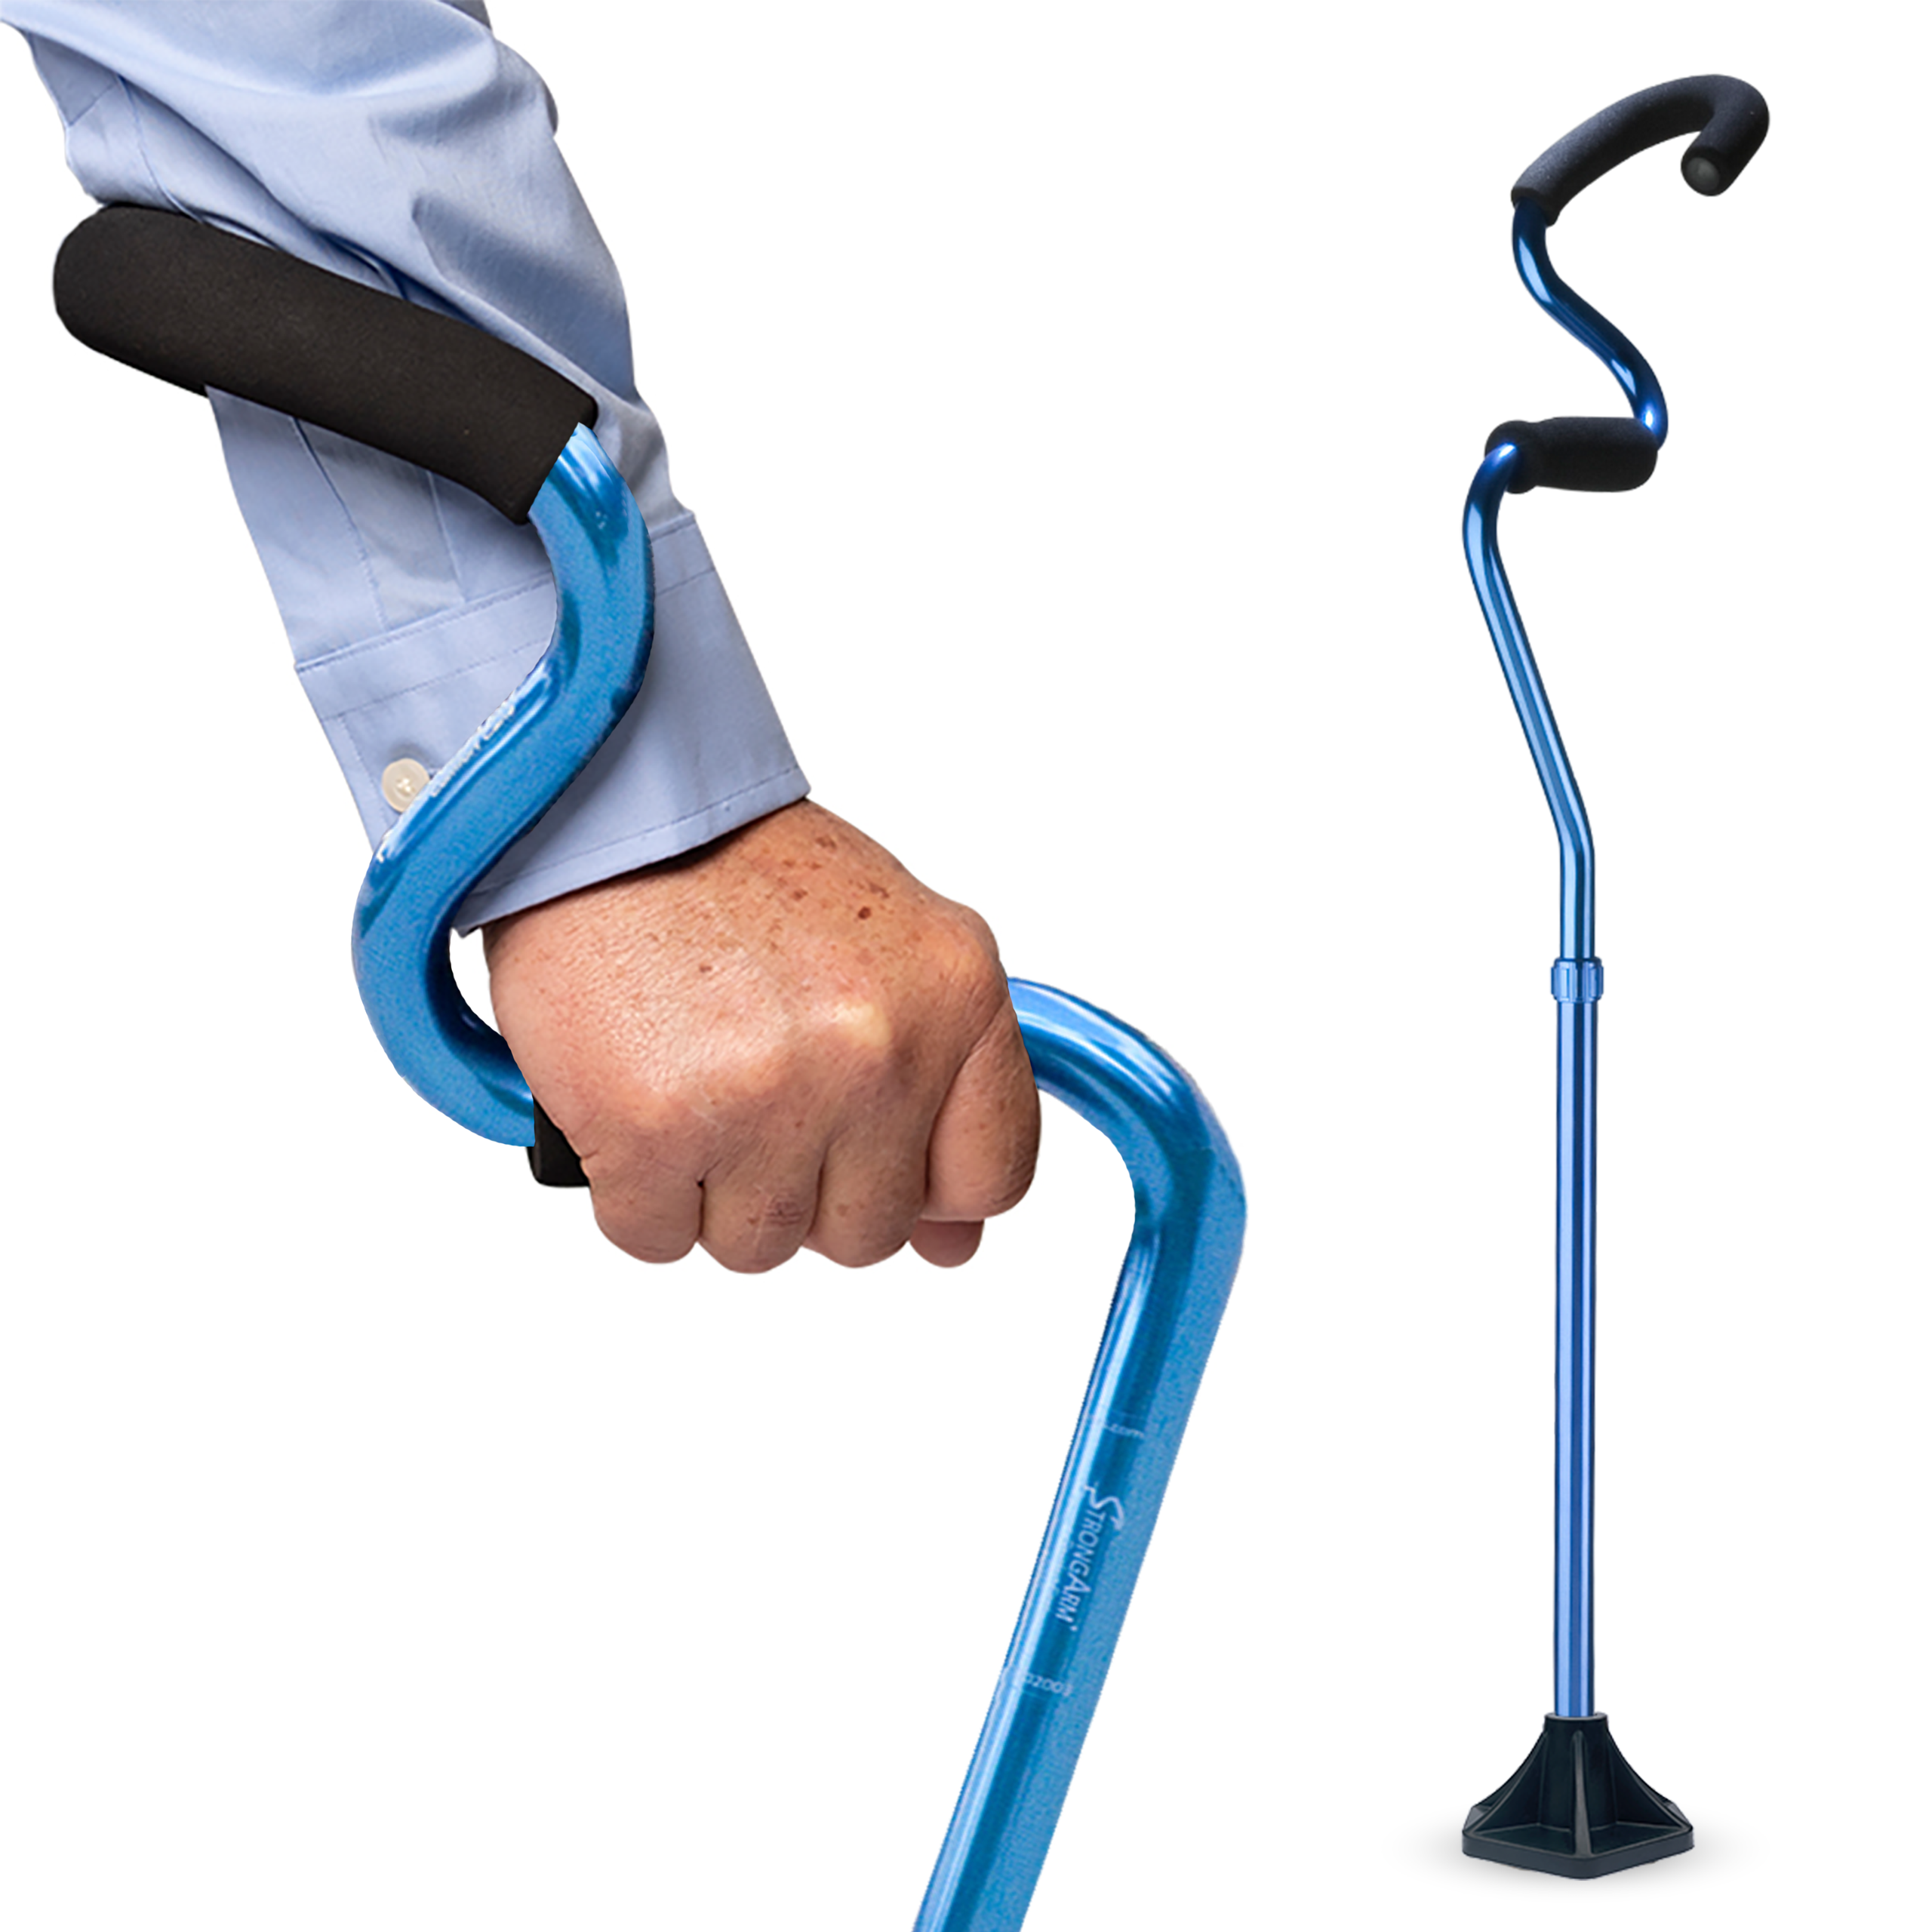 BM001 StrongArm® Comfort Cane - Sunset Healthcare Solutions